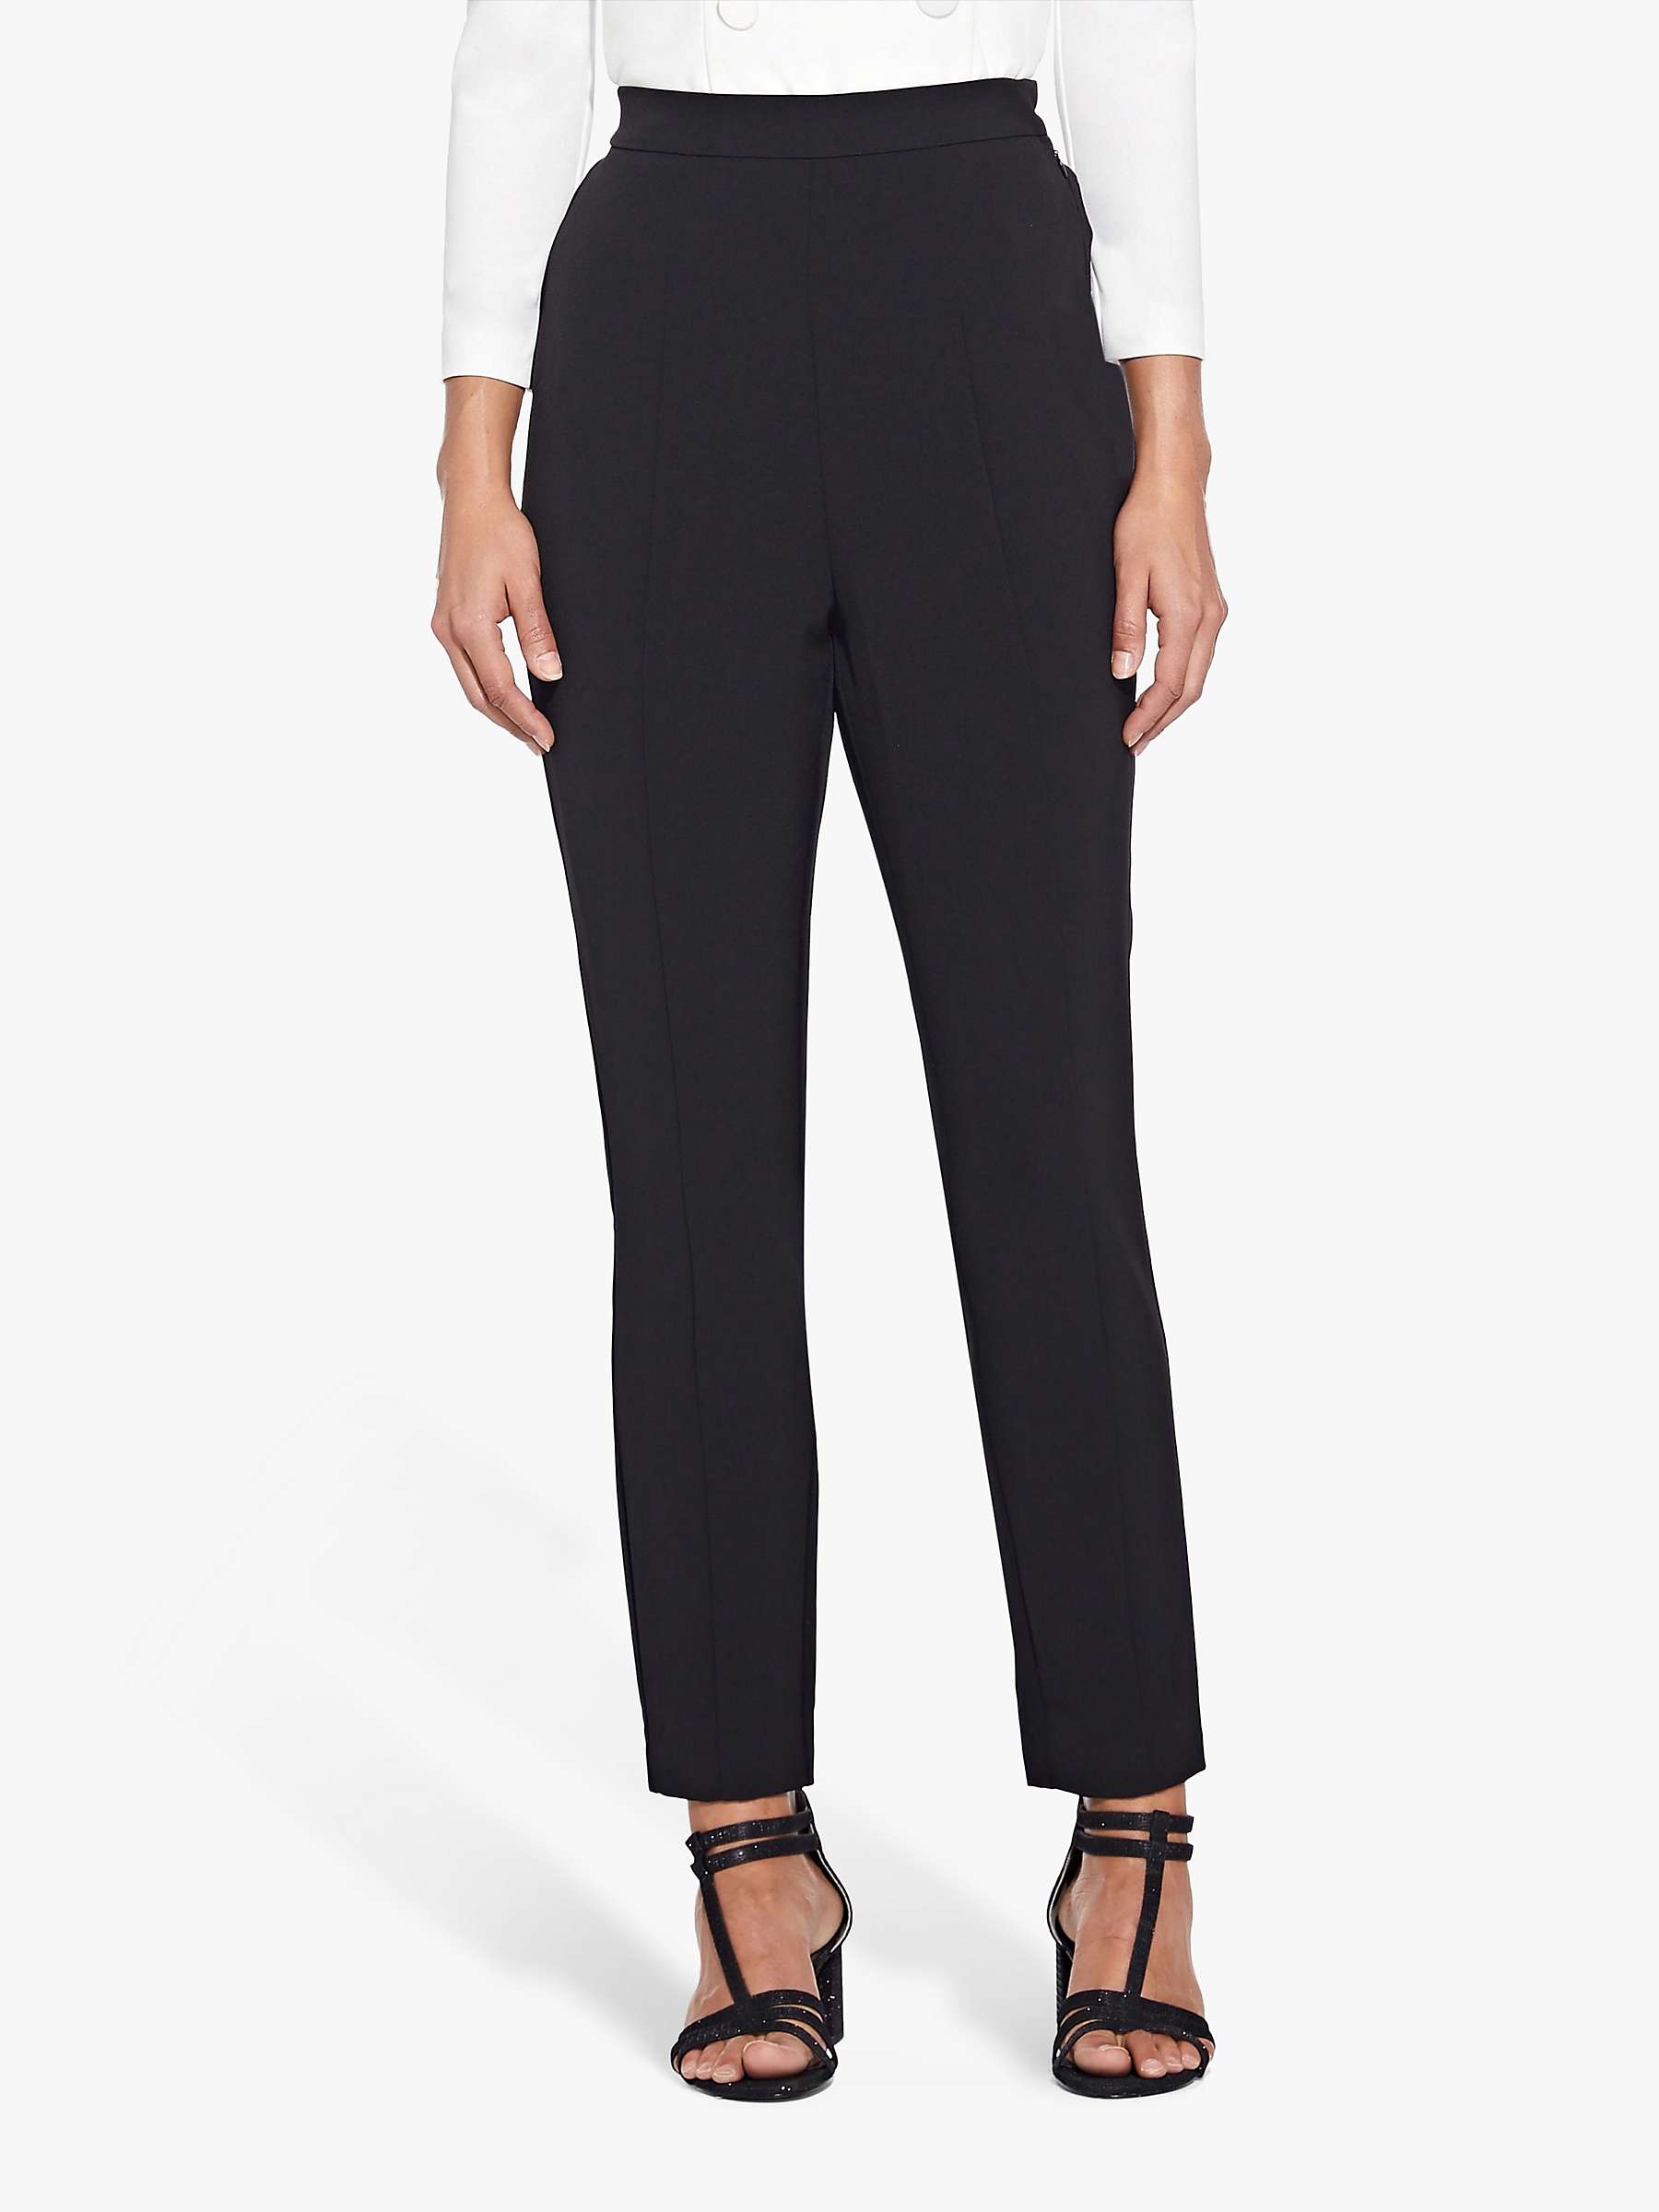 Buy Adrianna Papell Crepe Slim Trousers, Black Online at johnlewis.com